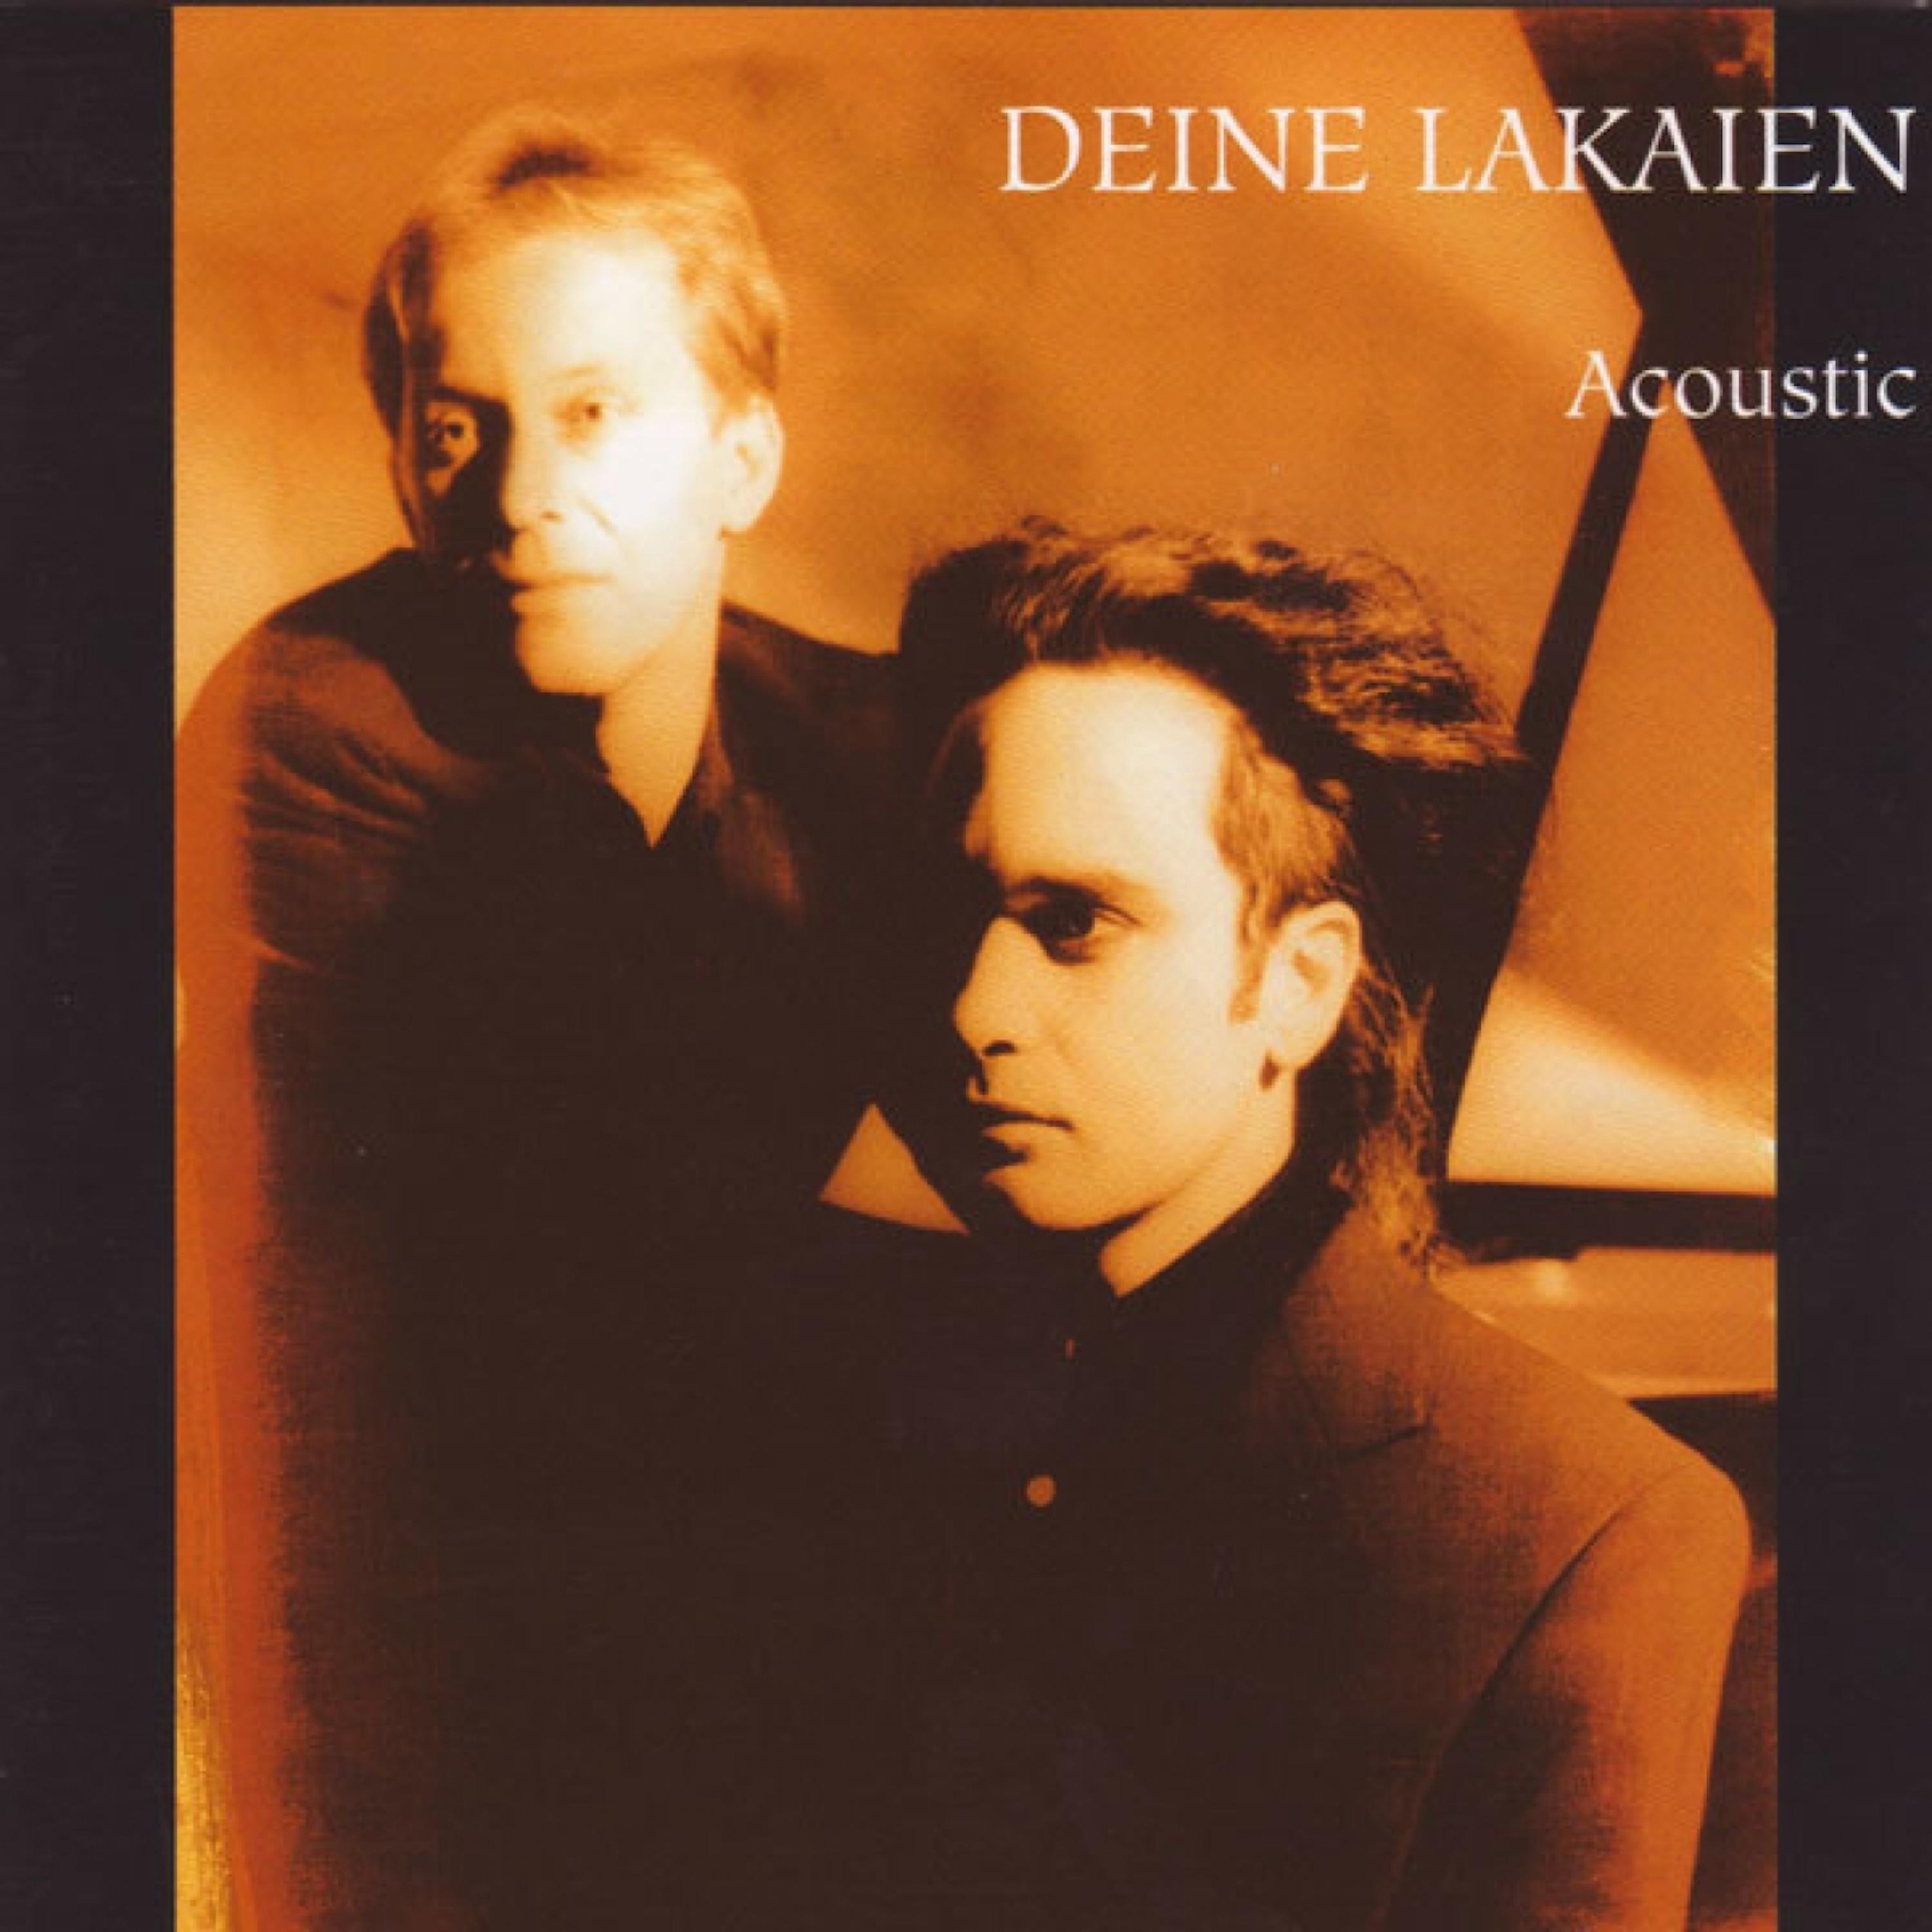 Deine Lakaien - Wasted Years (Live & Acoustic)